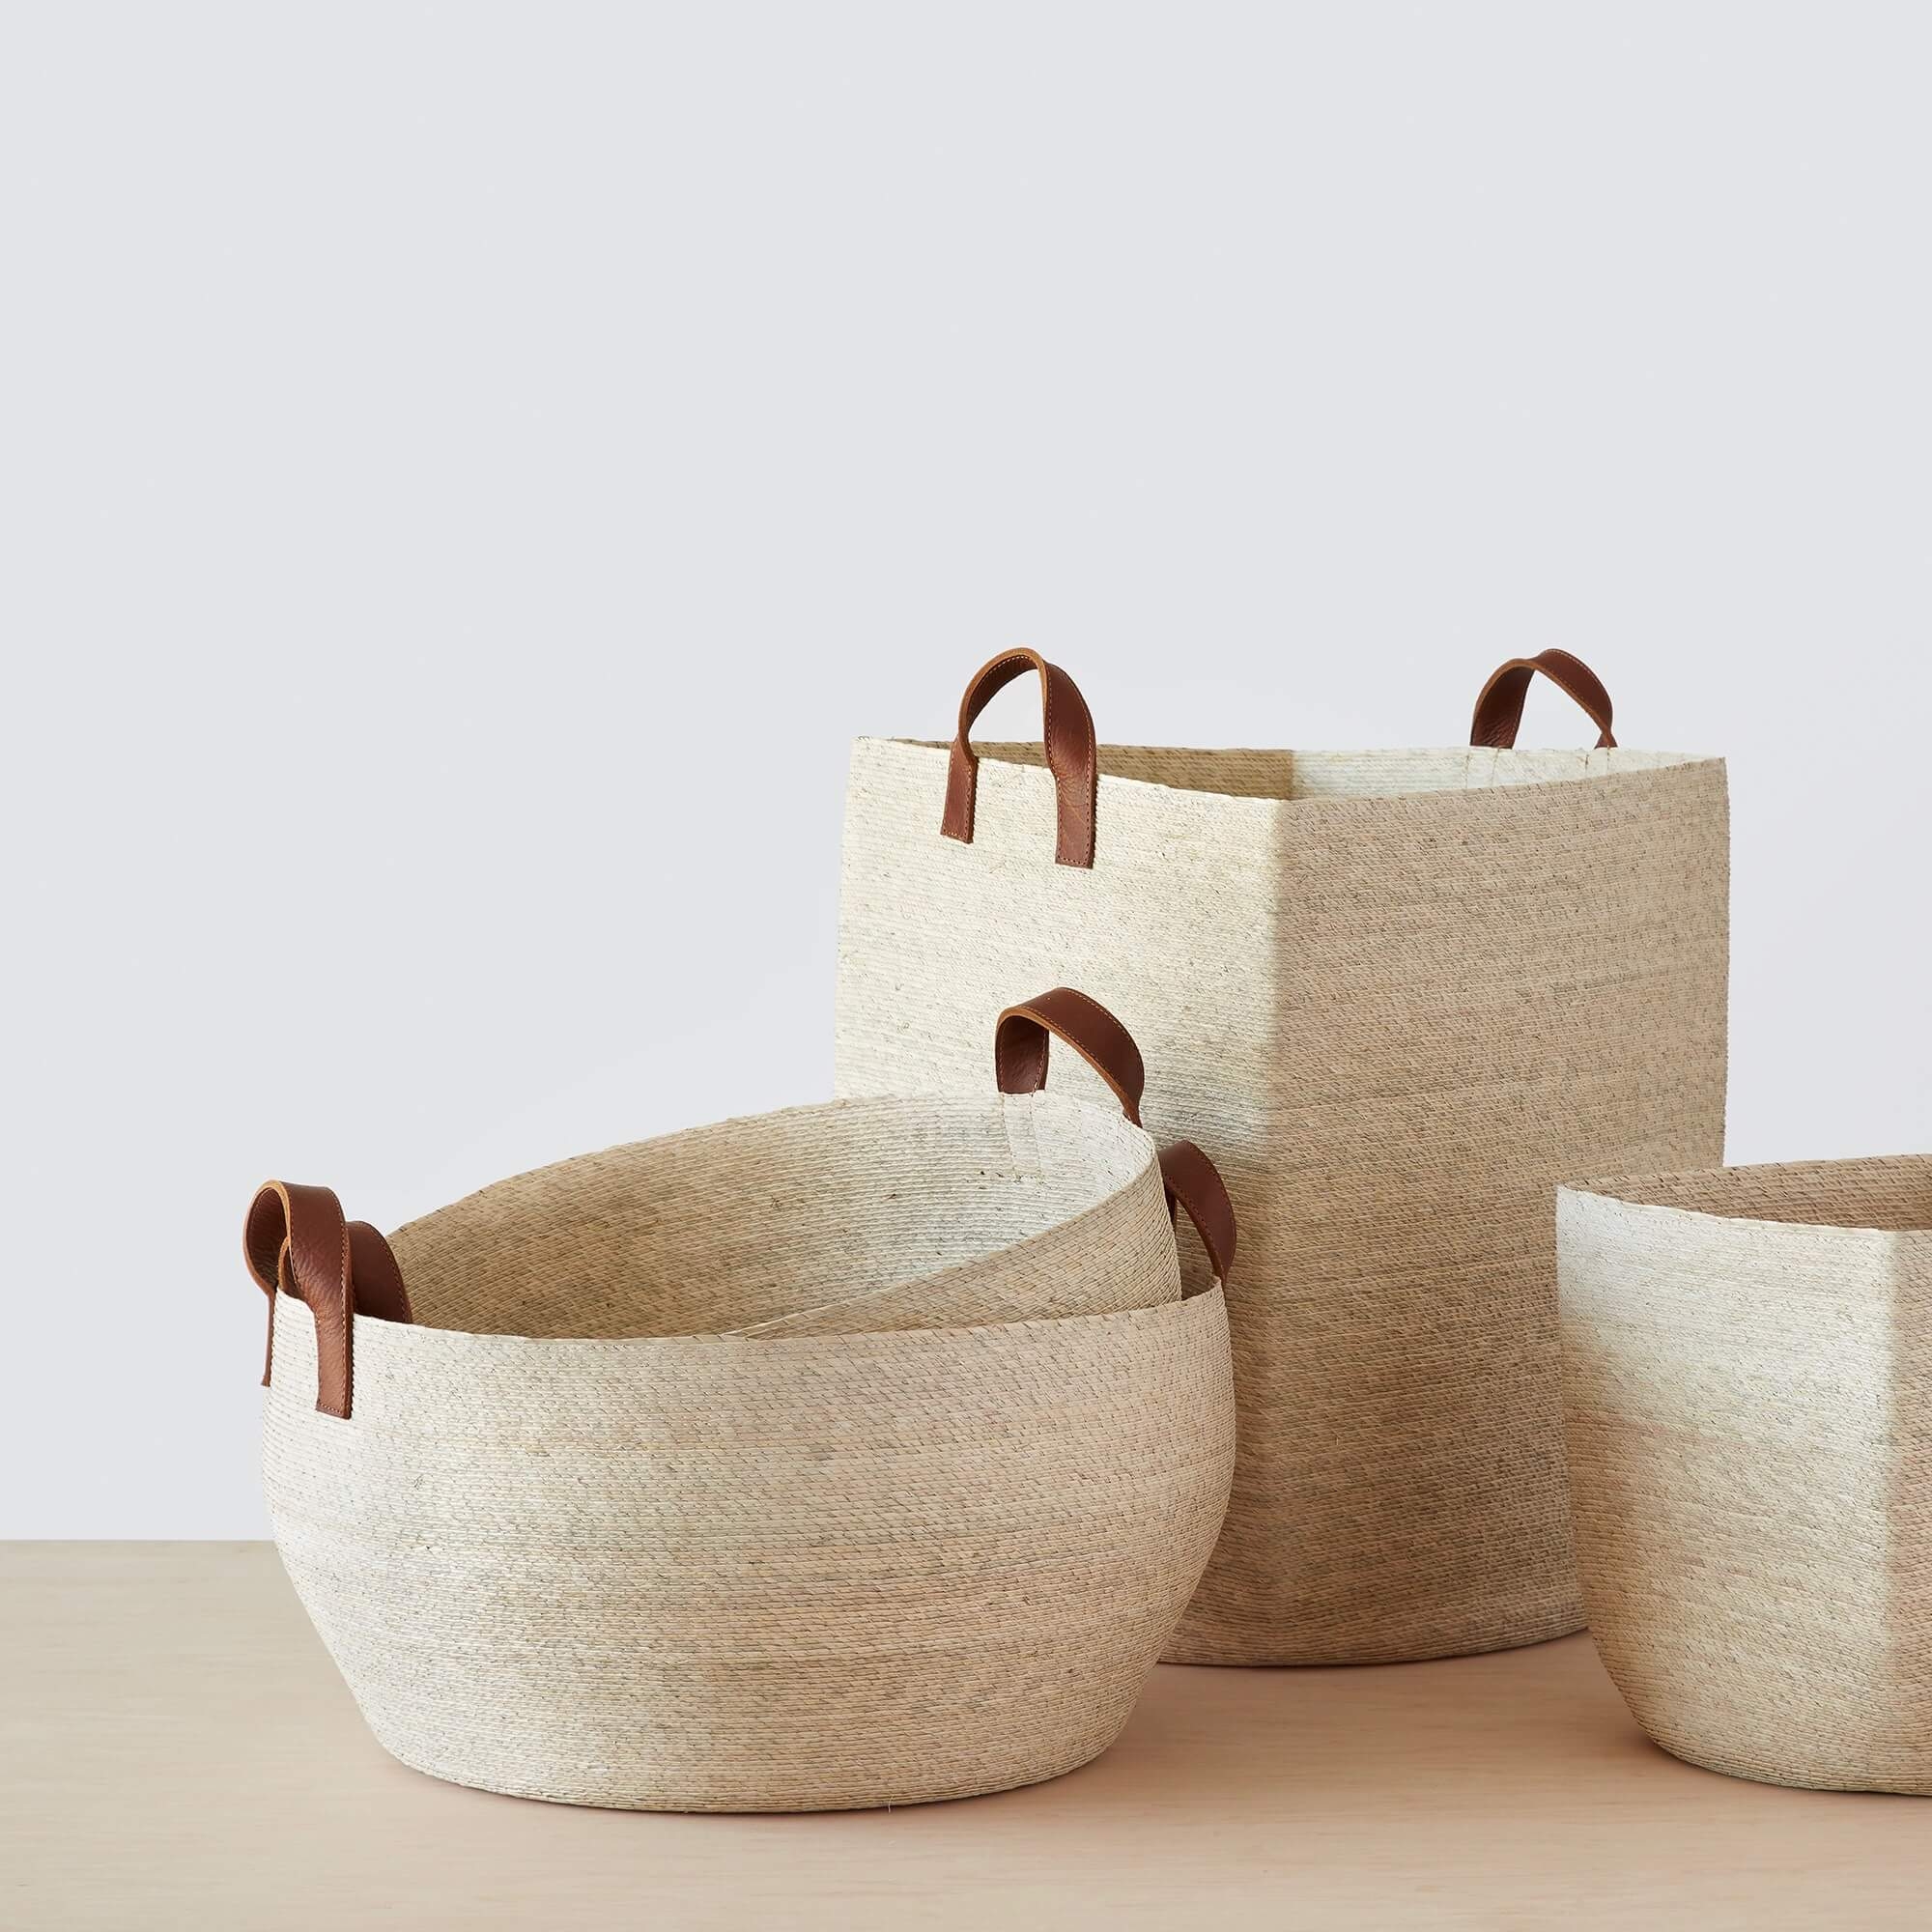 The Citizenry Mercado Floor Baskets | Large | Natural - Image 7